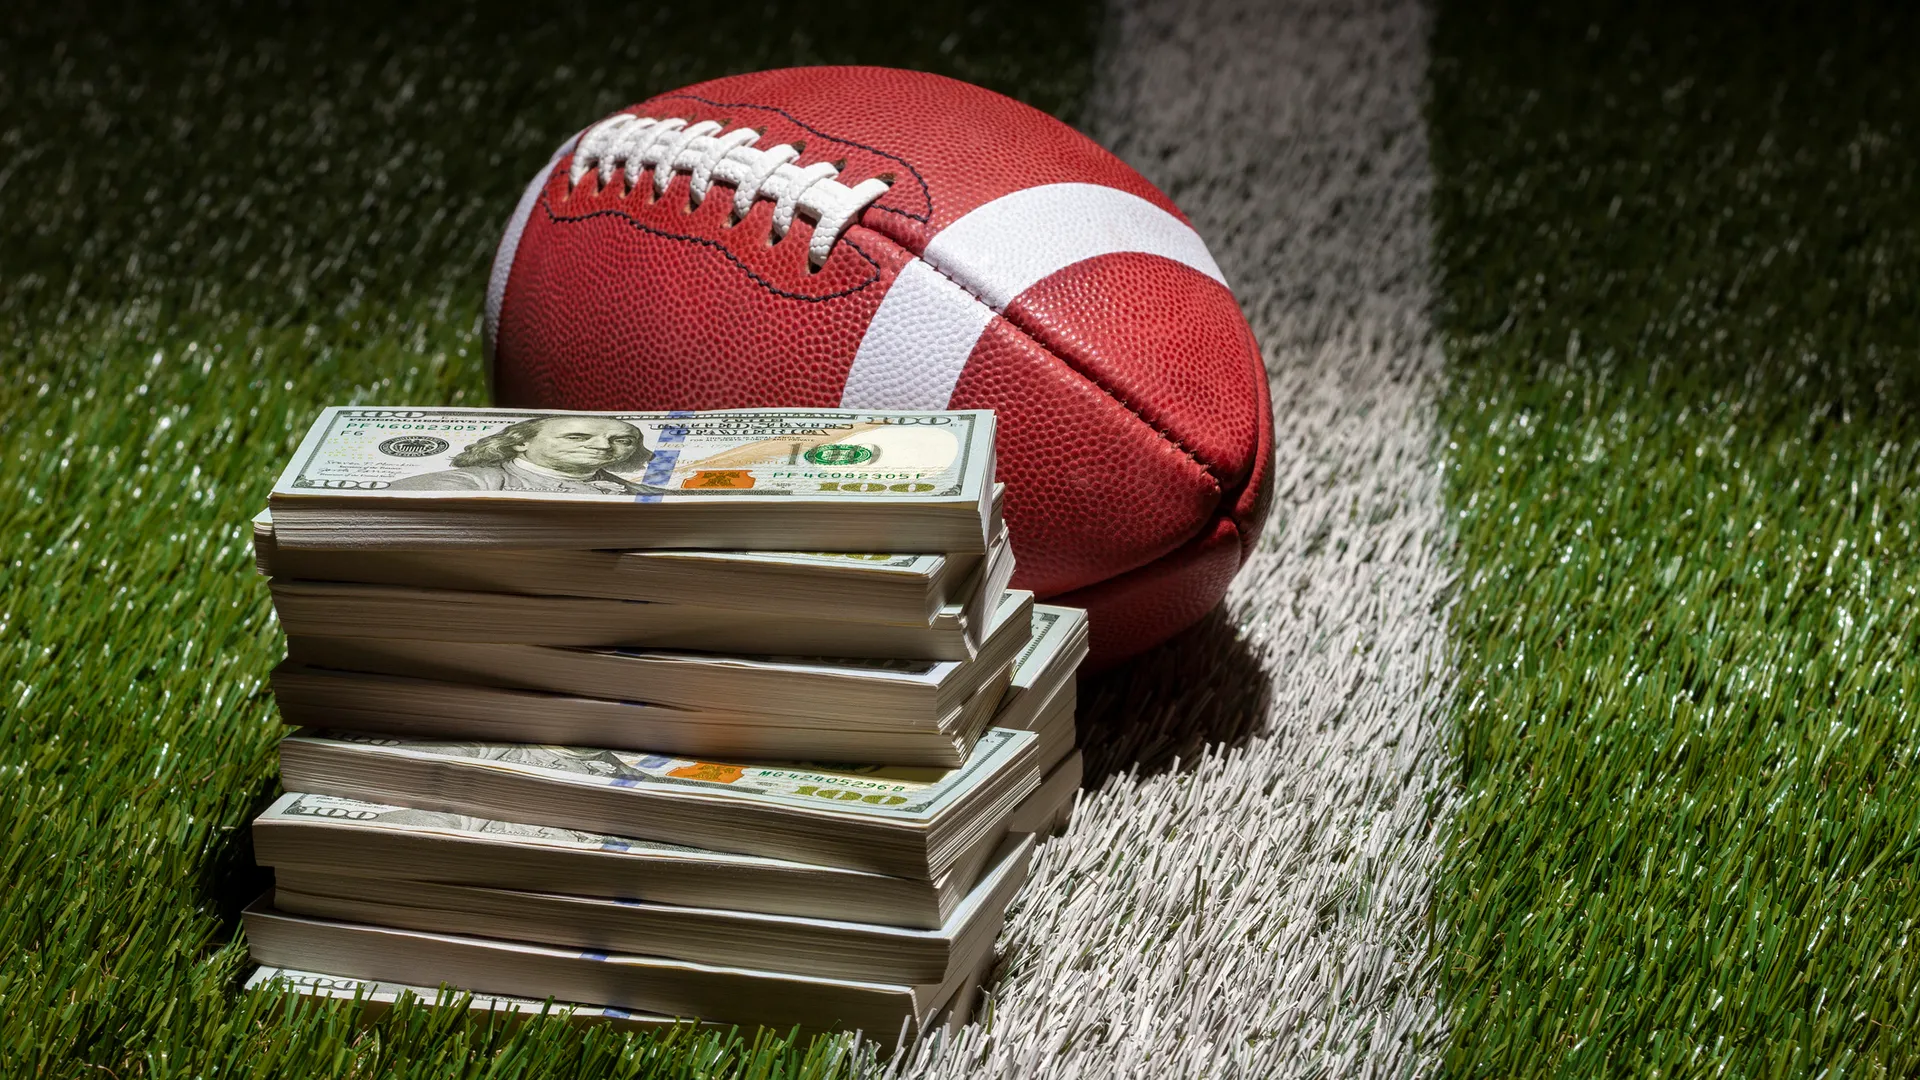 A football and a pile of one hundred dollar bills on a grass field with stripe and dark background.